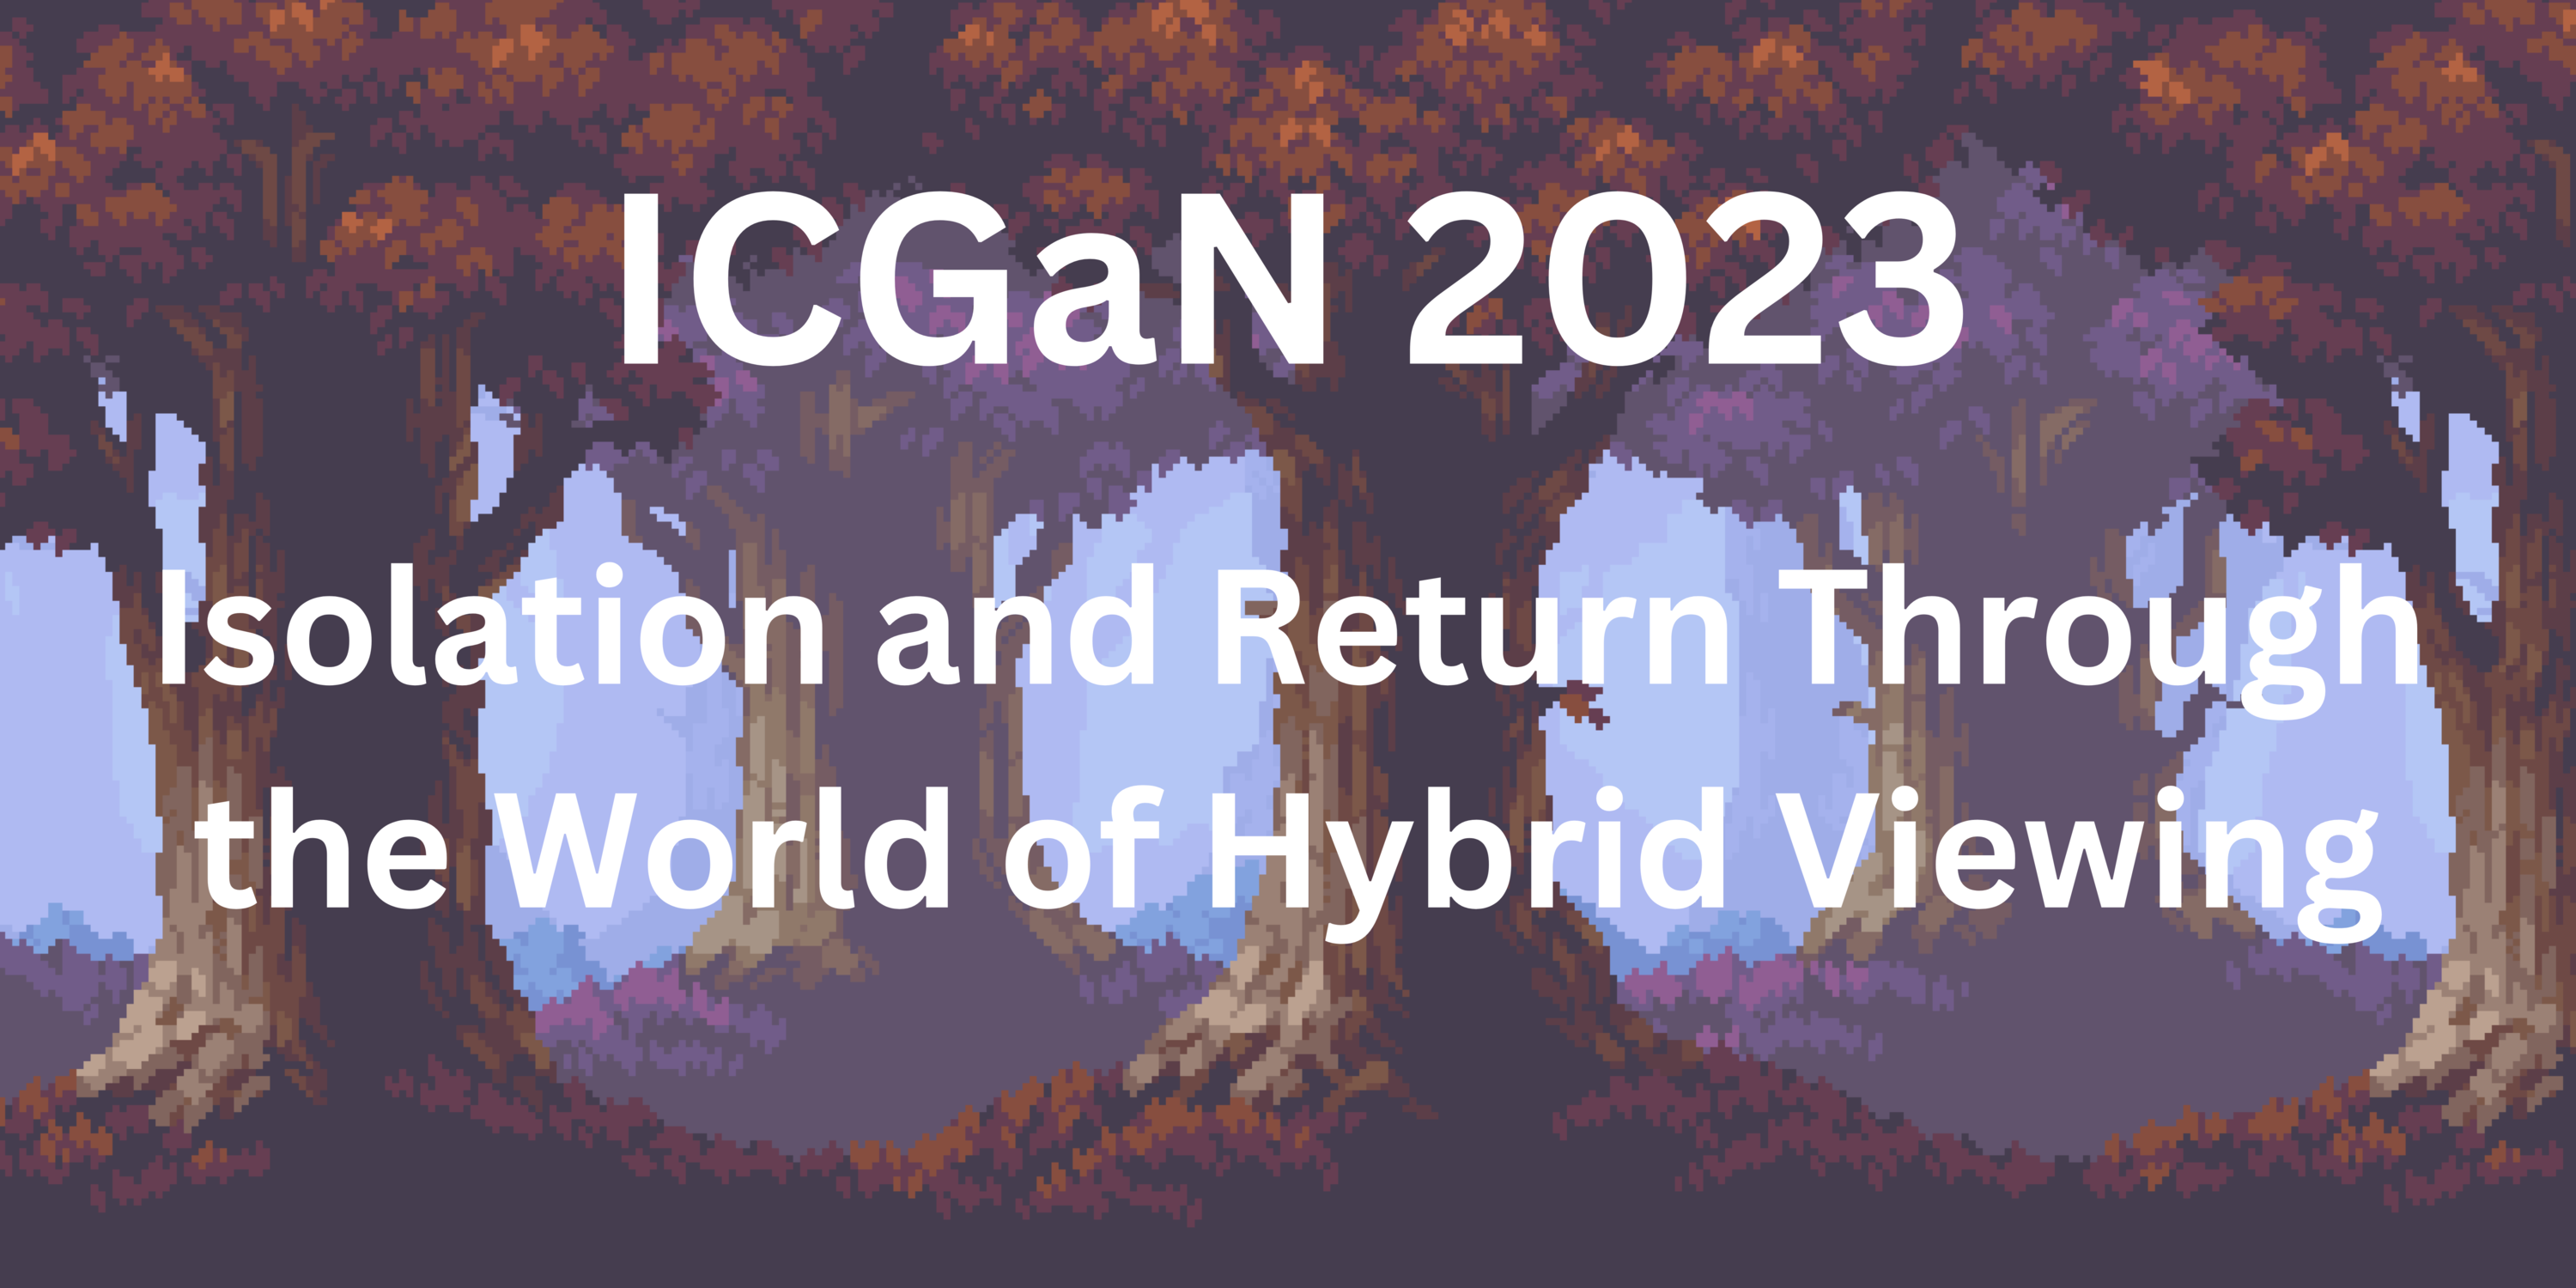 ICGaN 2023 - Isolation and Return Through the World of Hybrid Viewing